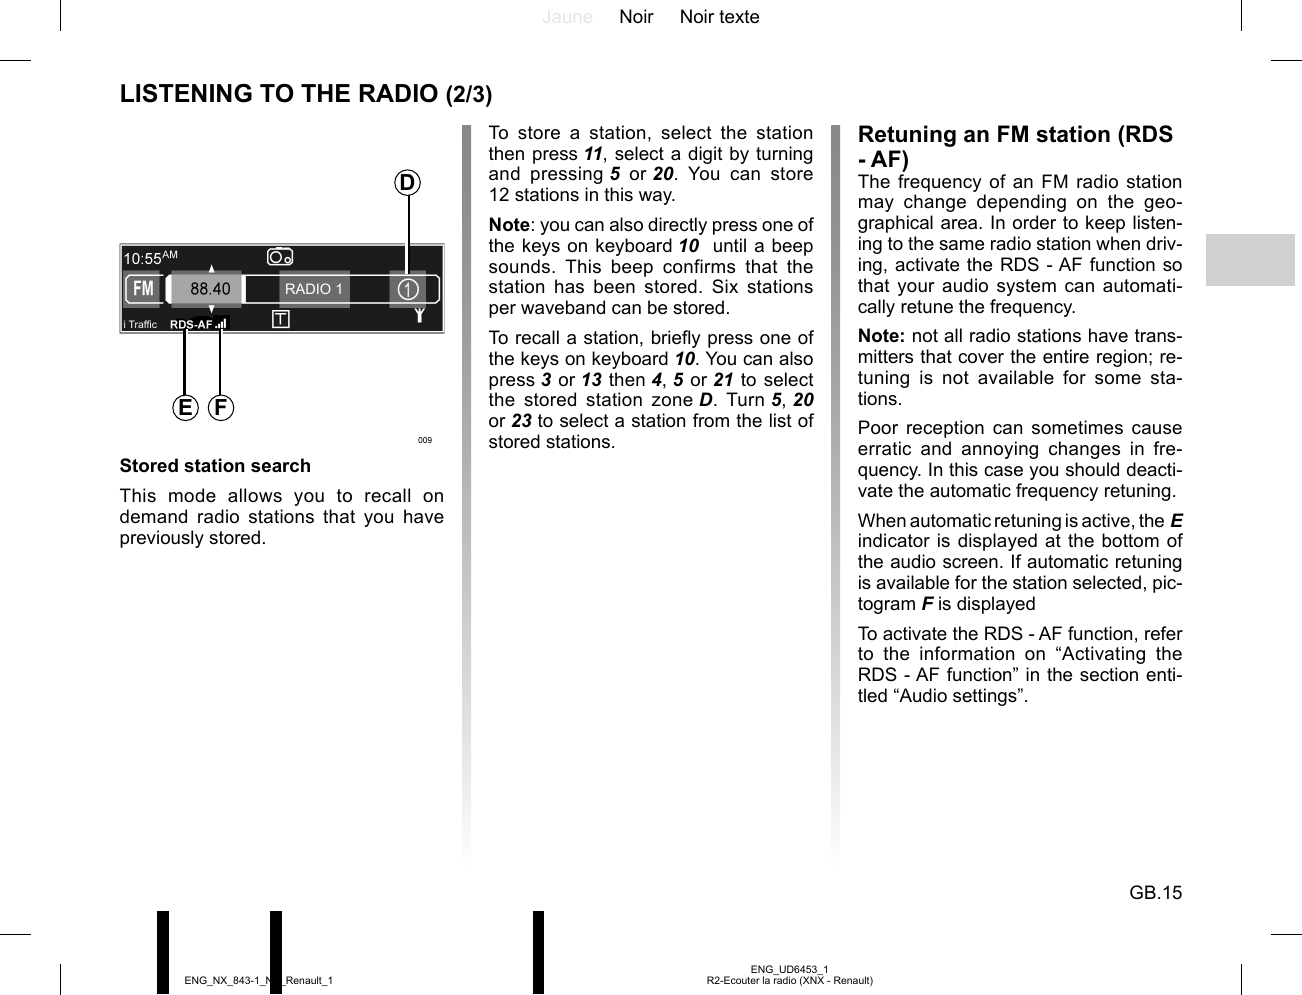 Jaune Noir Noir texteGB.15ENG_UD6453_1R2-Ecouter la radio (XNX - Renault)ENG_NX_843-1_NX_Renault_1i Traf¿ cRADIO 1LISTENING TO THE RADIO (2/3)To store a station, select the station then press 11, select a digit by turning and pressing 5 or 20. You can store 12 stations in this way.Note: you can also directly press one of the keys on keyboard 10  until a beep sounds. This beep confirms that the station has been stored. Six stations per waveband can be stored.To recall a station, briefly press one of the keys on keyboard 10. You can also press 3 or 13 then 4, 5 or 21 to select the stored station zone D. Turn 5, 20  or 23 to select a station from the list of stored stations.Retuning an FM station (RDS - AF)The frequency of an FM radio station may change depending on the geo-graphical area. In order to keep listen-ing to the same radio station when driv-ing, activate the RDS - AF function so that your audio system can automati-cally retune the frequency.Note: not all radio stations have trans-mitters that cover the entire region; re-tuning is not available for some sta-tions.Poor reception can sometimes cause erratic and annoying changes in fre-quency. In this case you should deacti-vate the automatic frequency retuning.When automatic retuning is active, the E indicator is displayed at the bottom of the audio screen. If automatic retuning is available for the station selected, pic-togram F is displayedTo activate the RDS - AF function, refer to the information on “Activating the RDS - AF function” in the section enti-tled “Audio settings”.Stored station searchThis mode allows you to recall on demand radio stations that you have previously stored.DE F